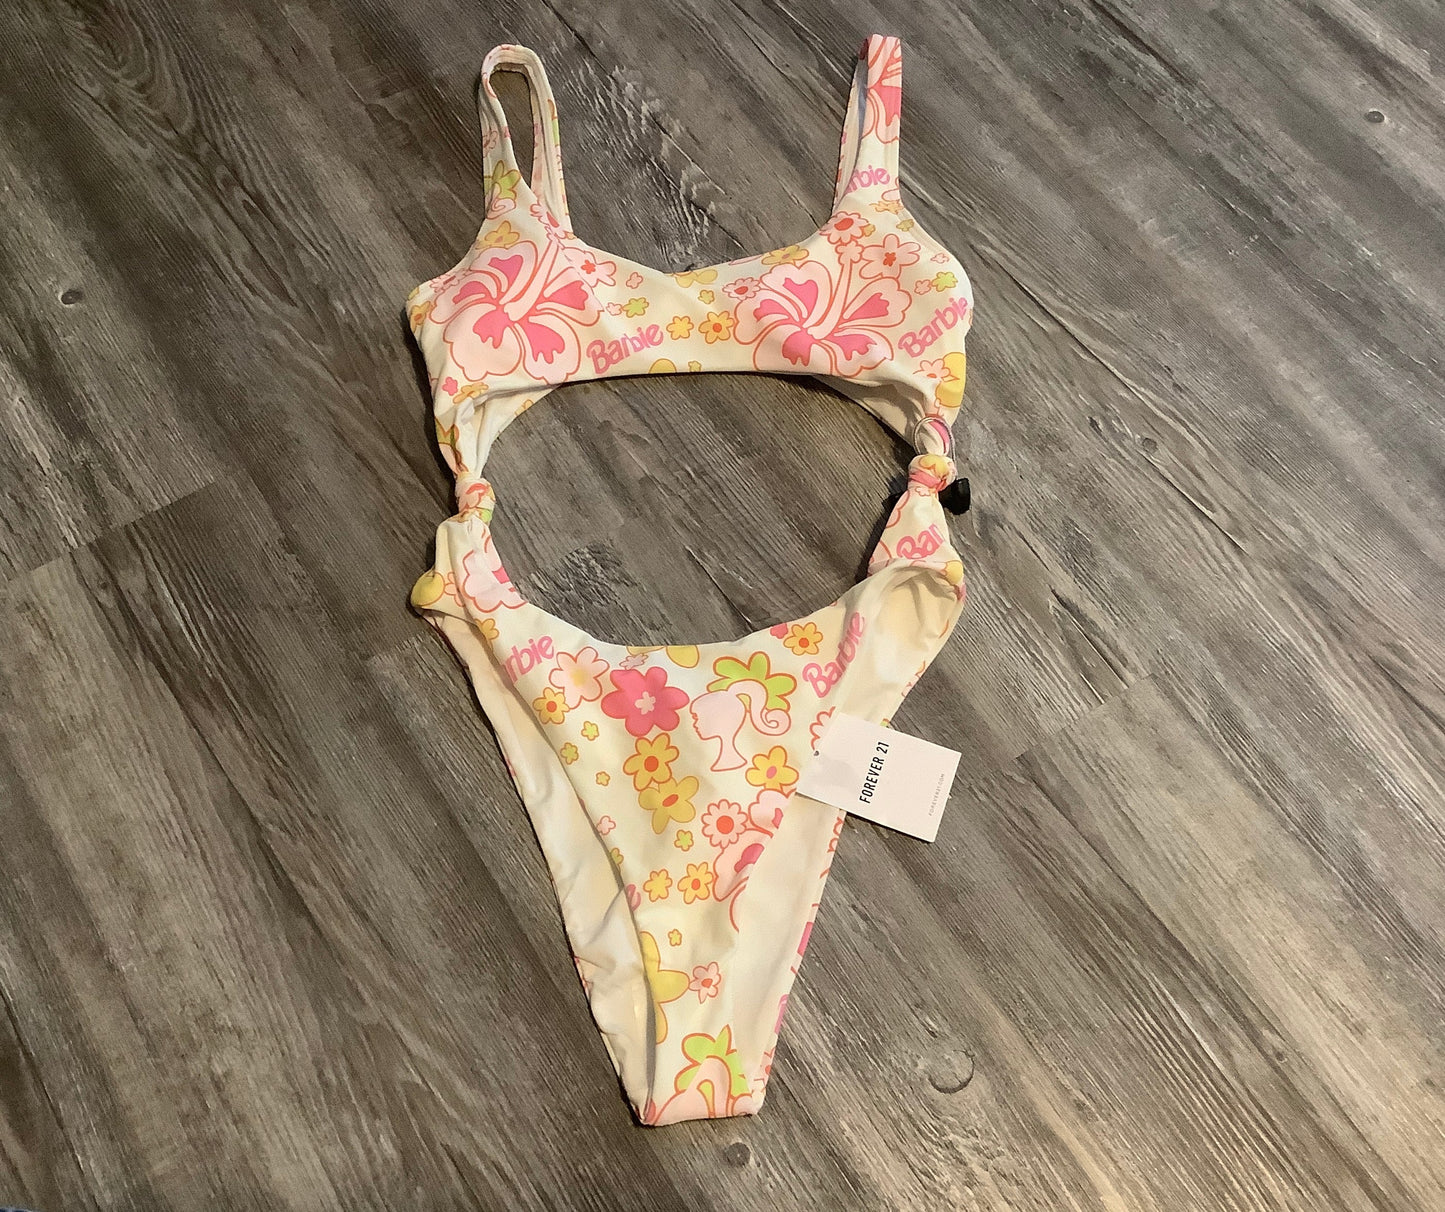 Floral Print Swimsuit Forever 21, Size S